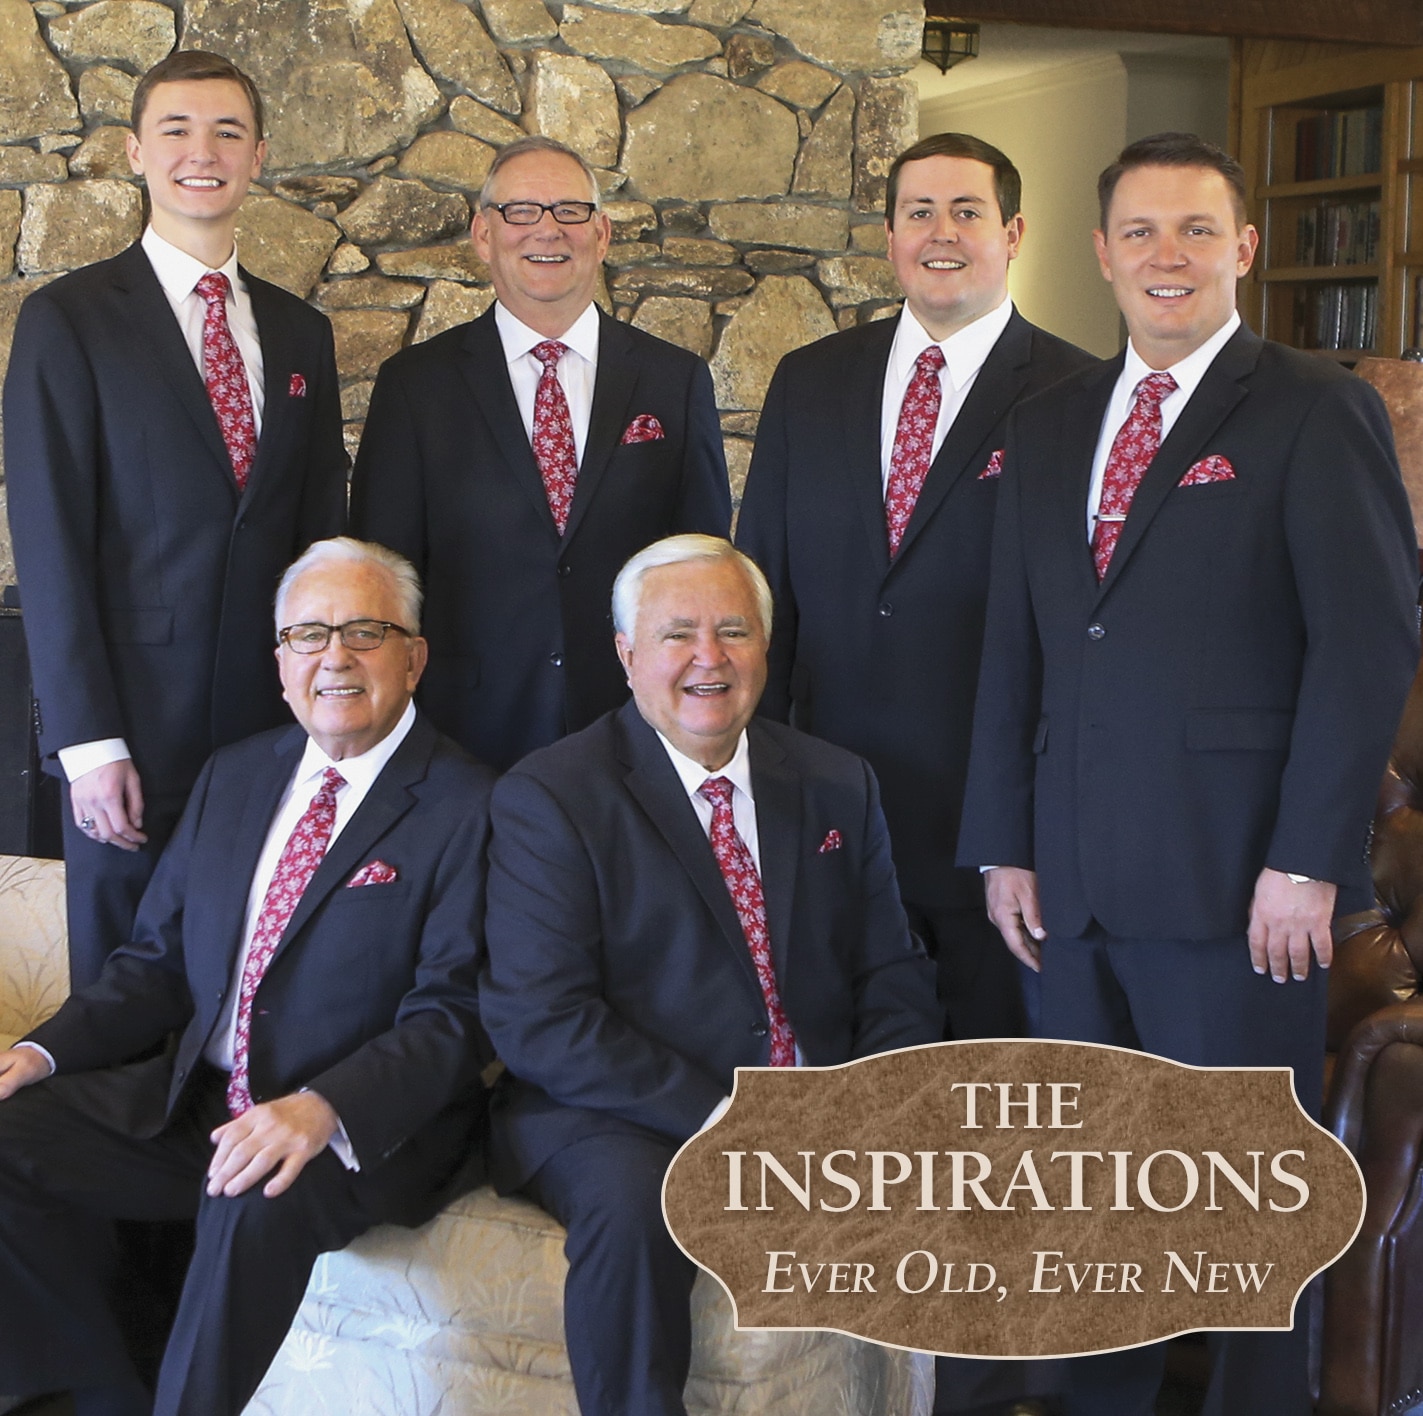 The cover of The Inspirations' album, Ever Old, Ever New